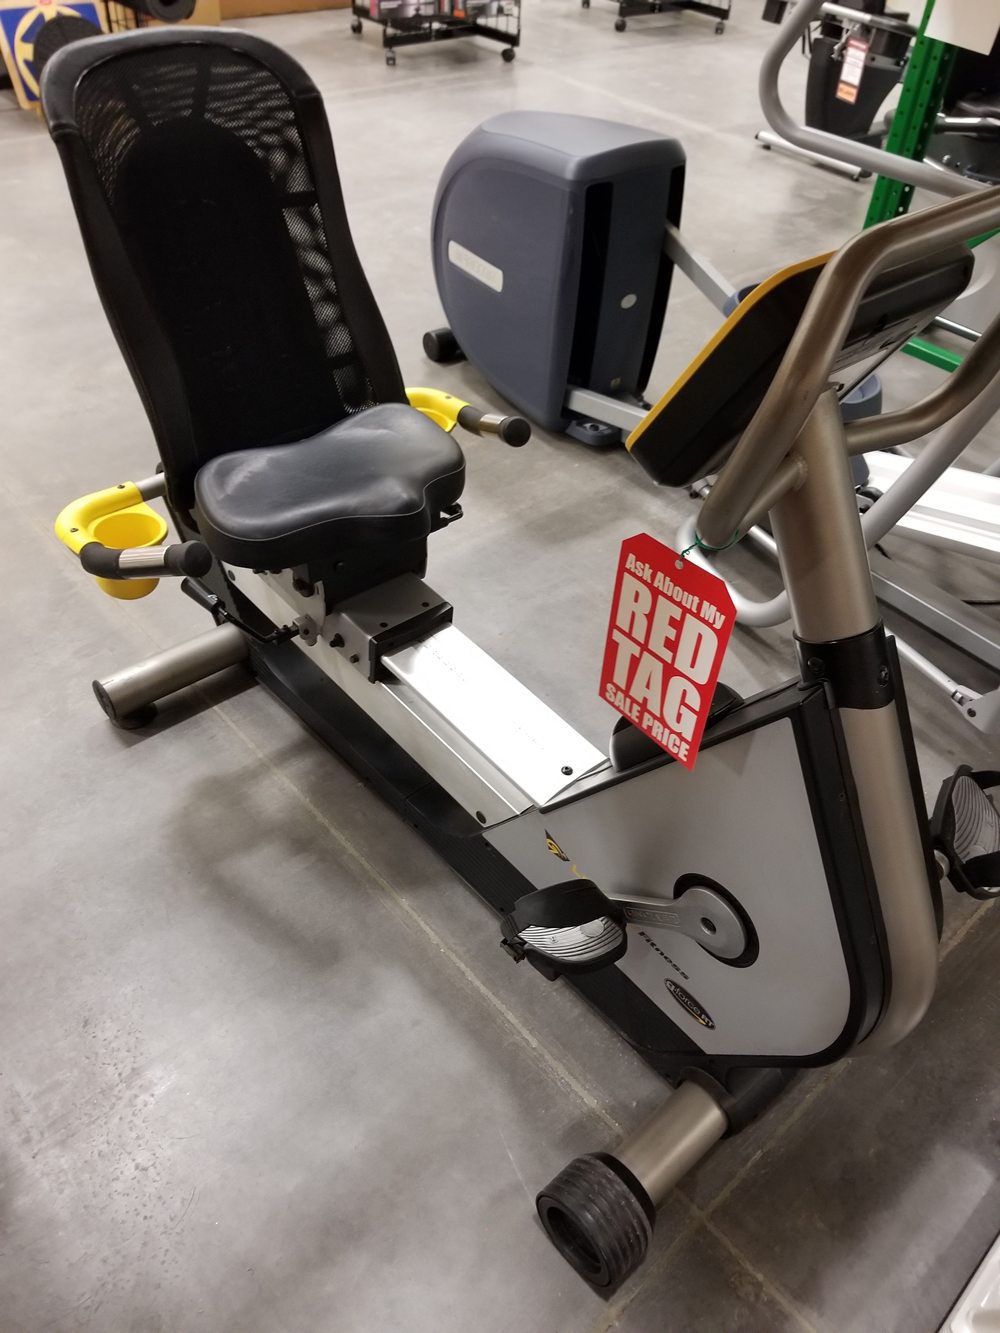 Used Fitness Equipment | Pre-Owned Equipment at Fitness 4 Home